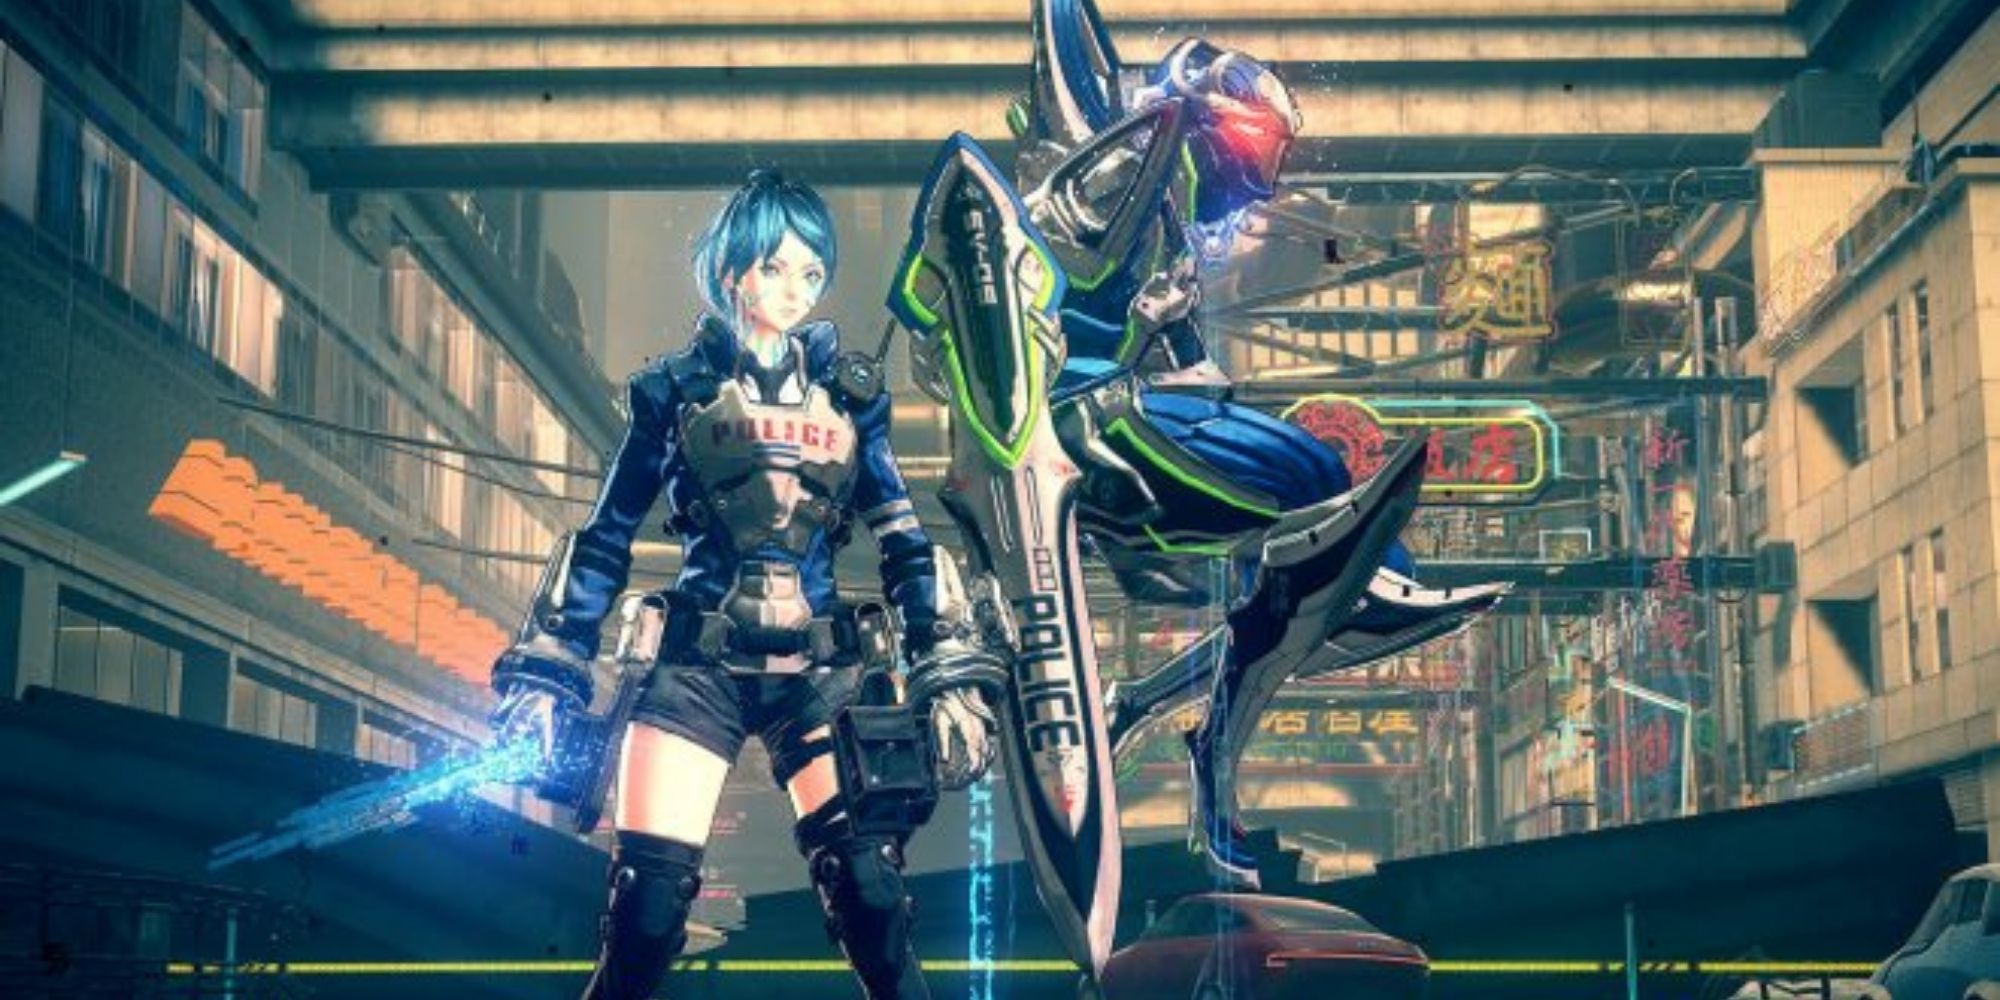 Female Astral Chain protagonist with the Sword Legion